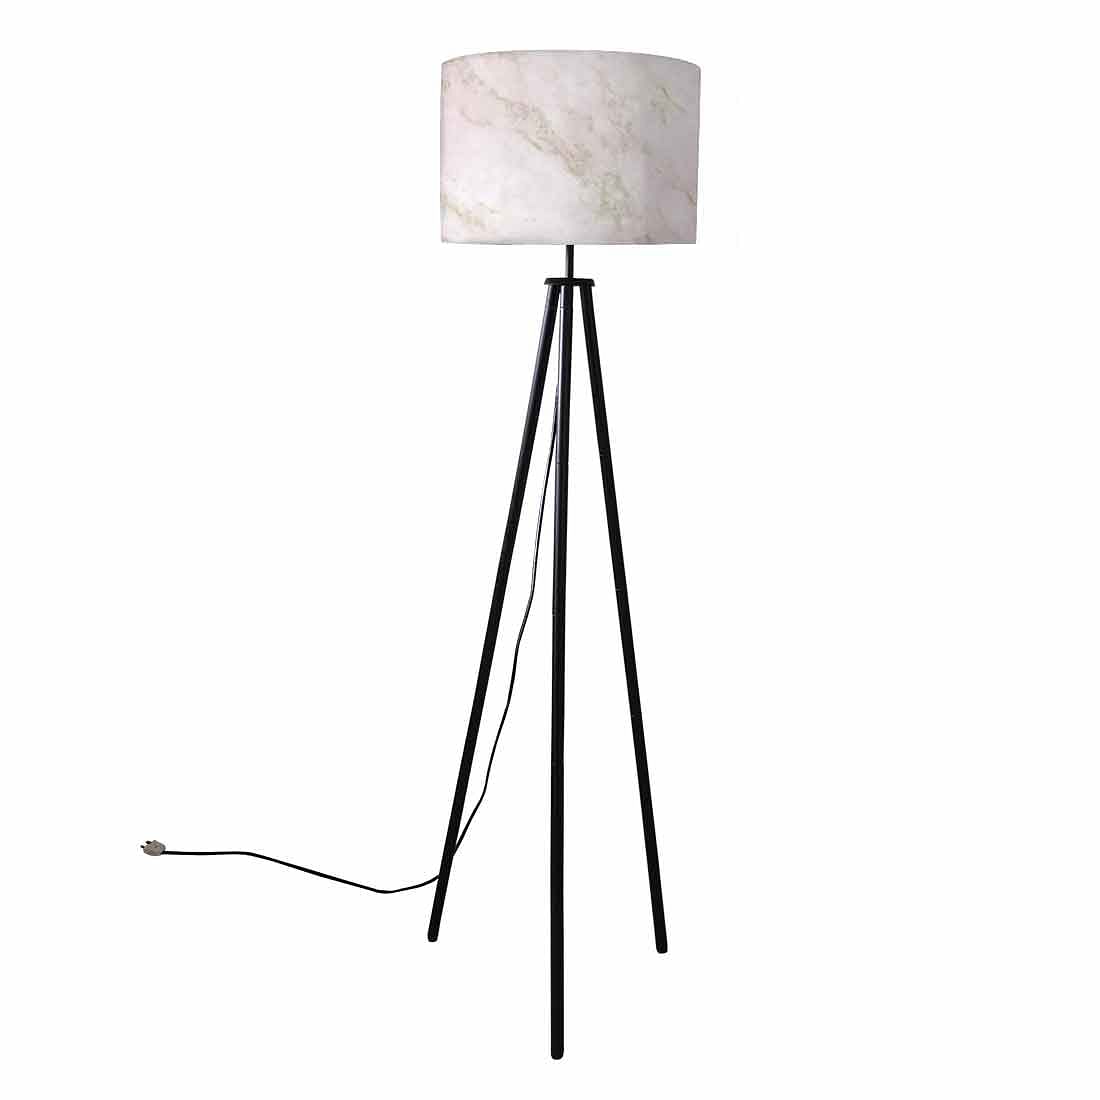 Tripod Floor Lamp Standing Light for Living Rooms -Pink Marble Effect Nutcase